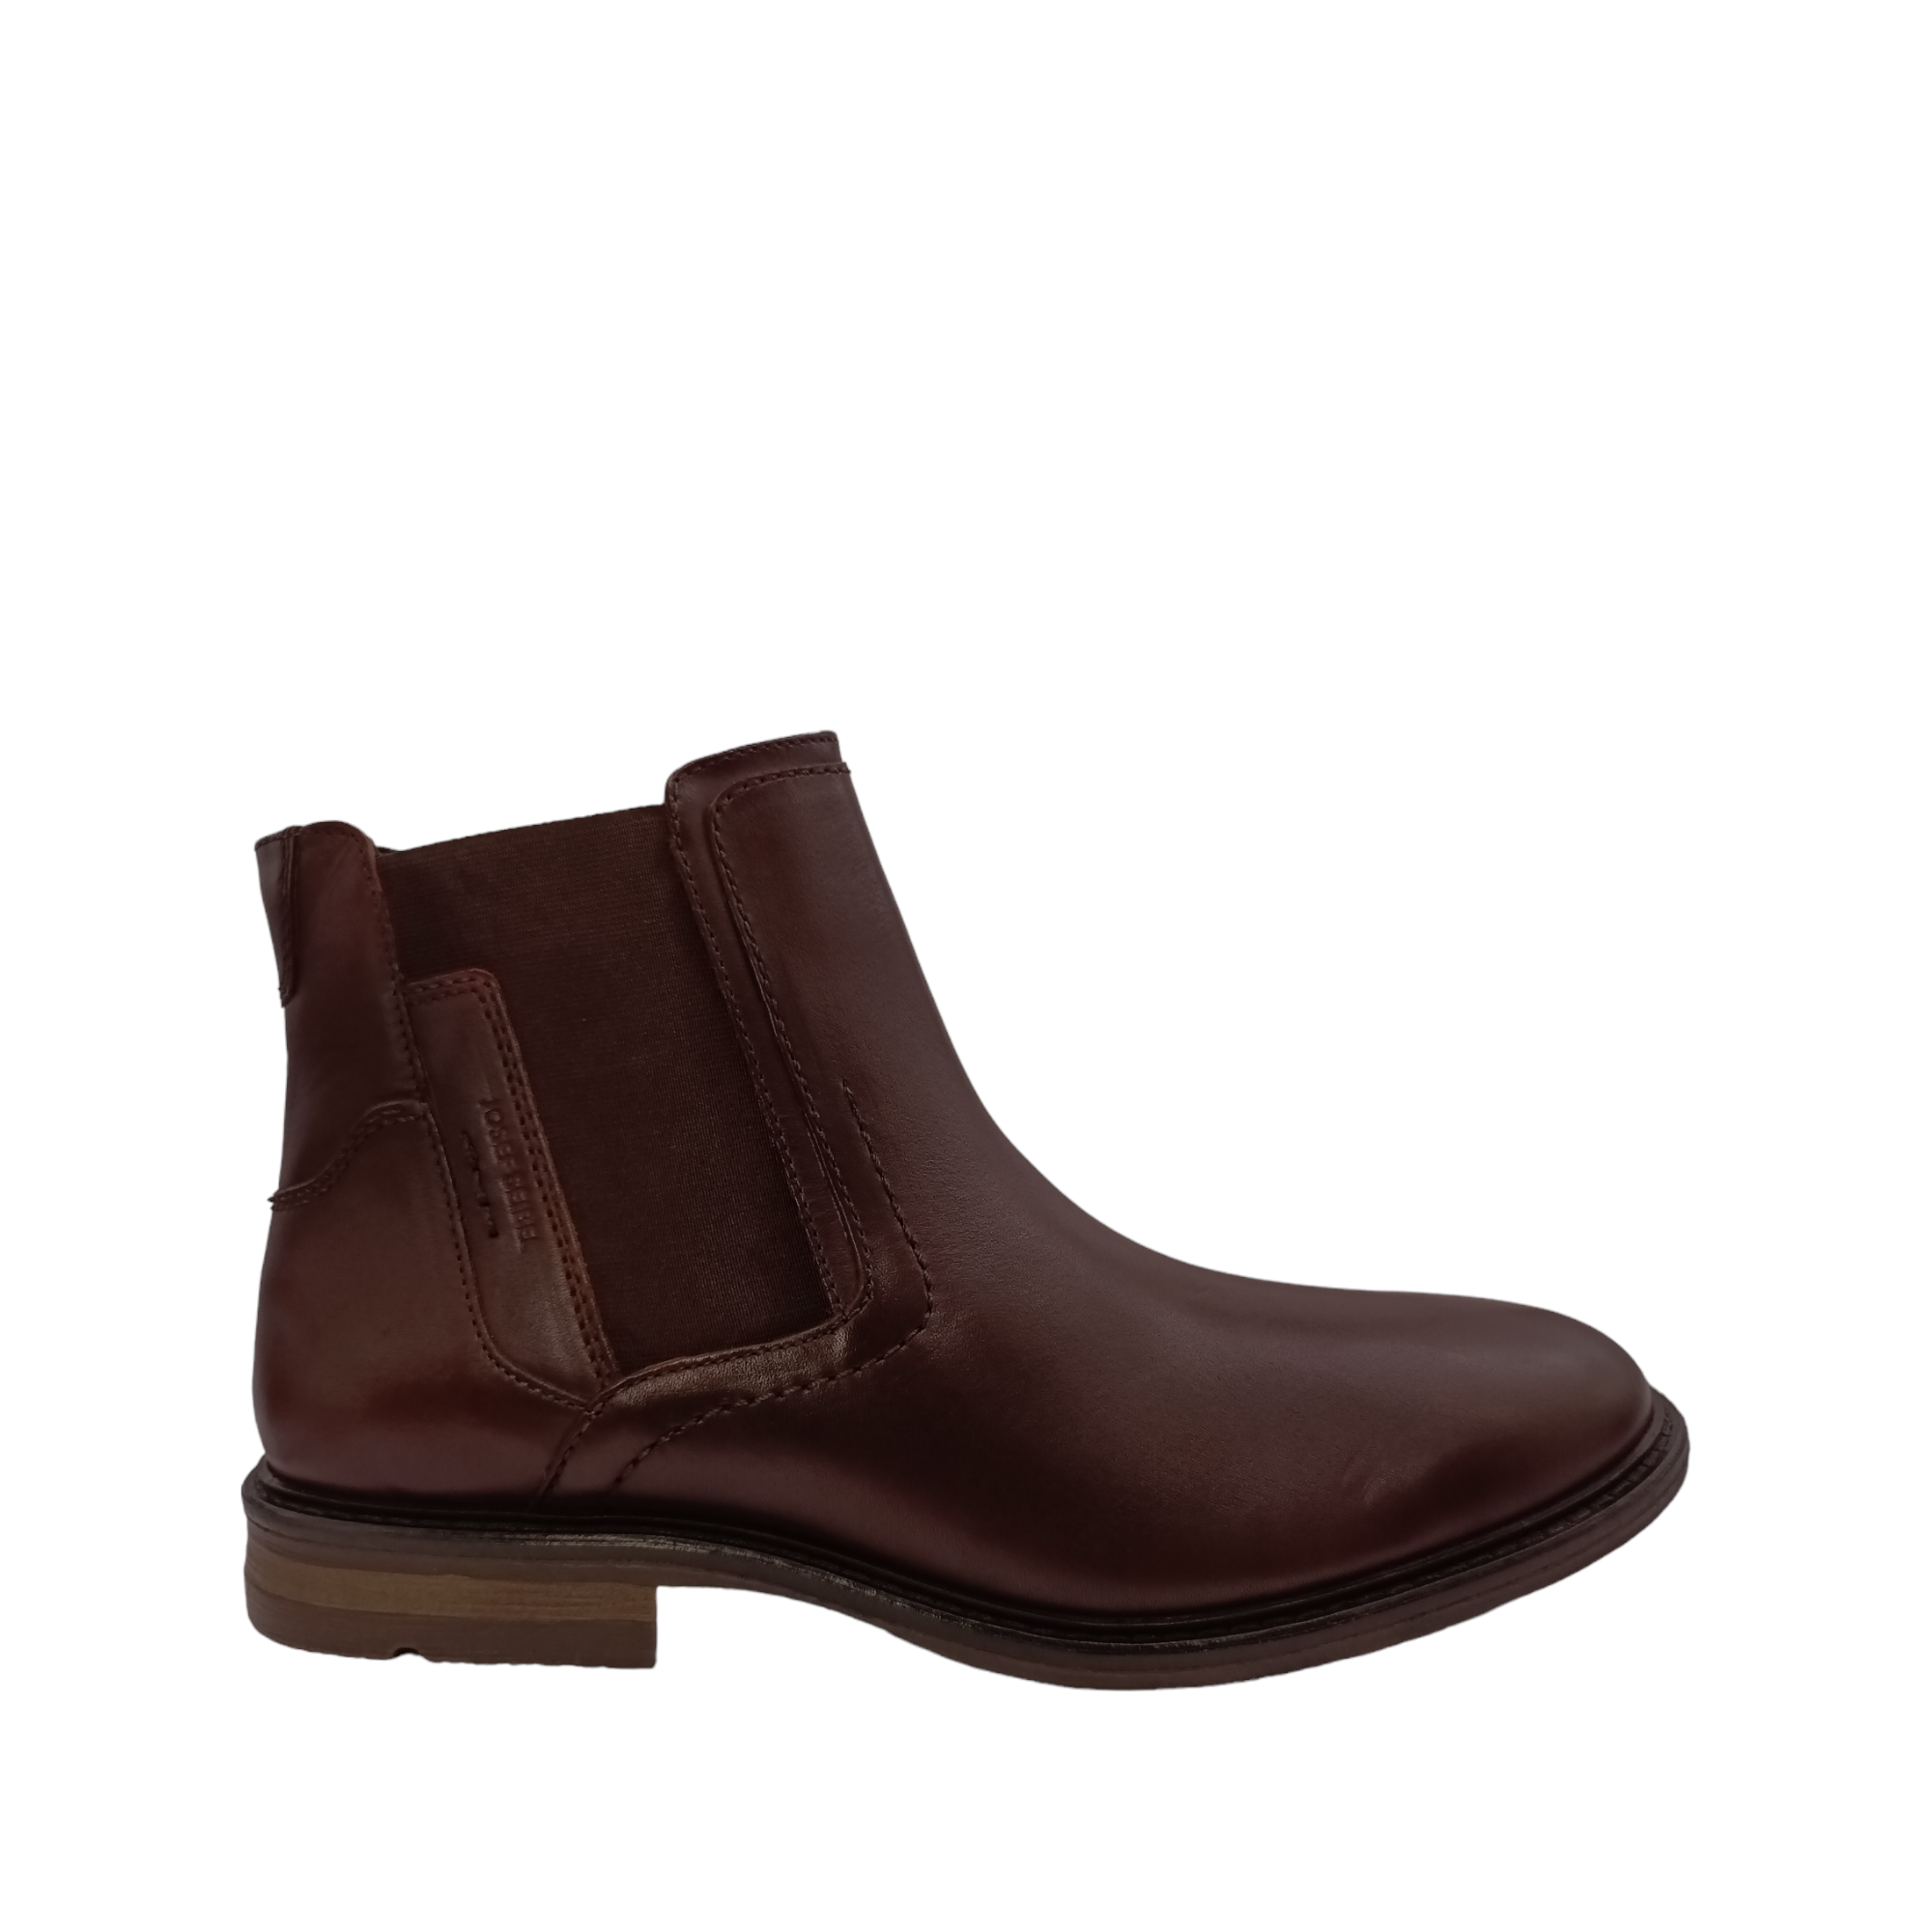 Side angle view of Earl 08 from Josef Seibel. Brown leather boot with large gusset. Shop online and instore with shoe&amp;me